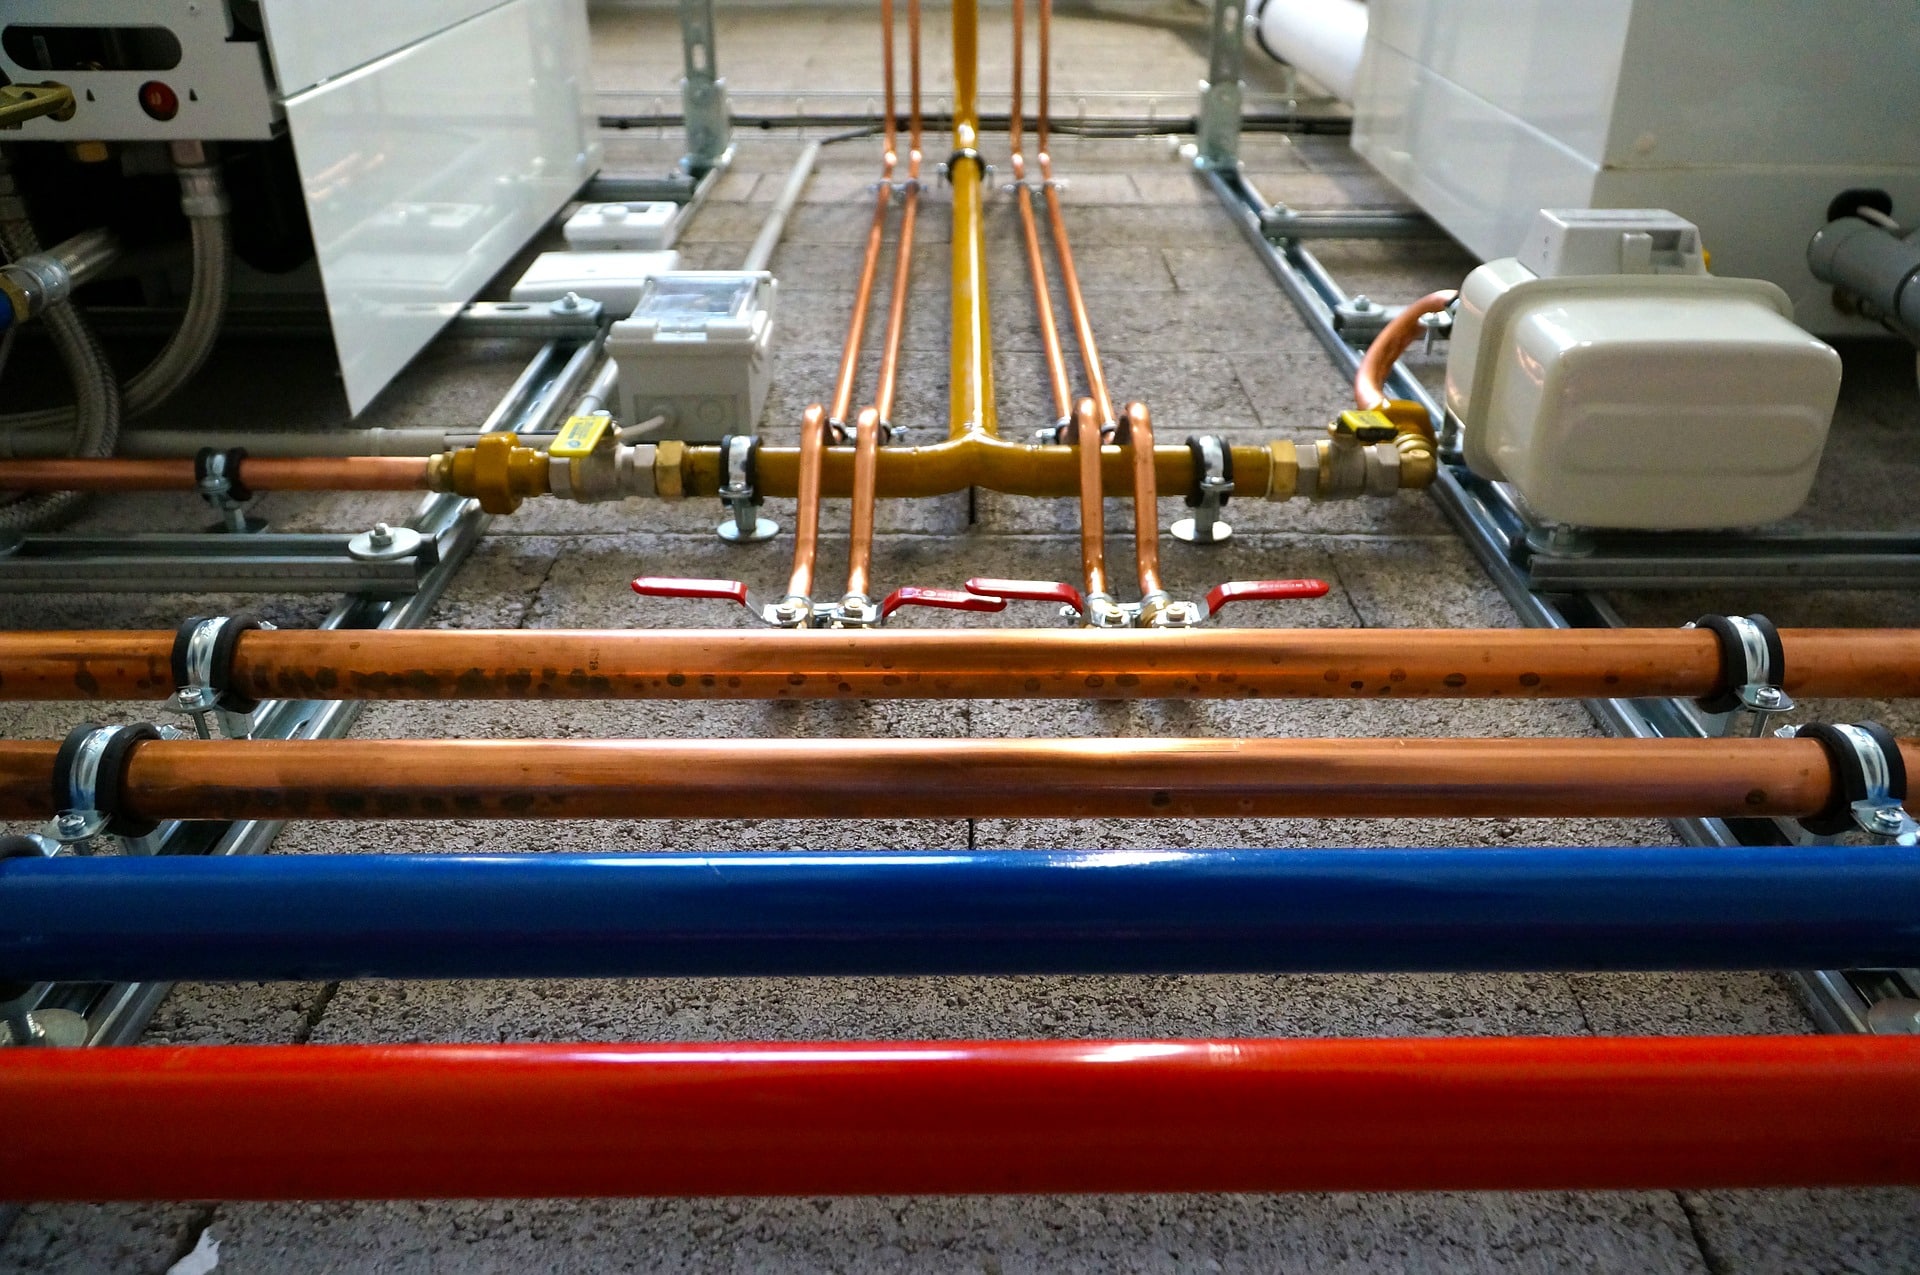 What Makes Commercial Plumbing so Specialized?